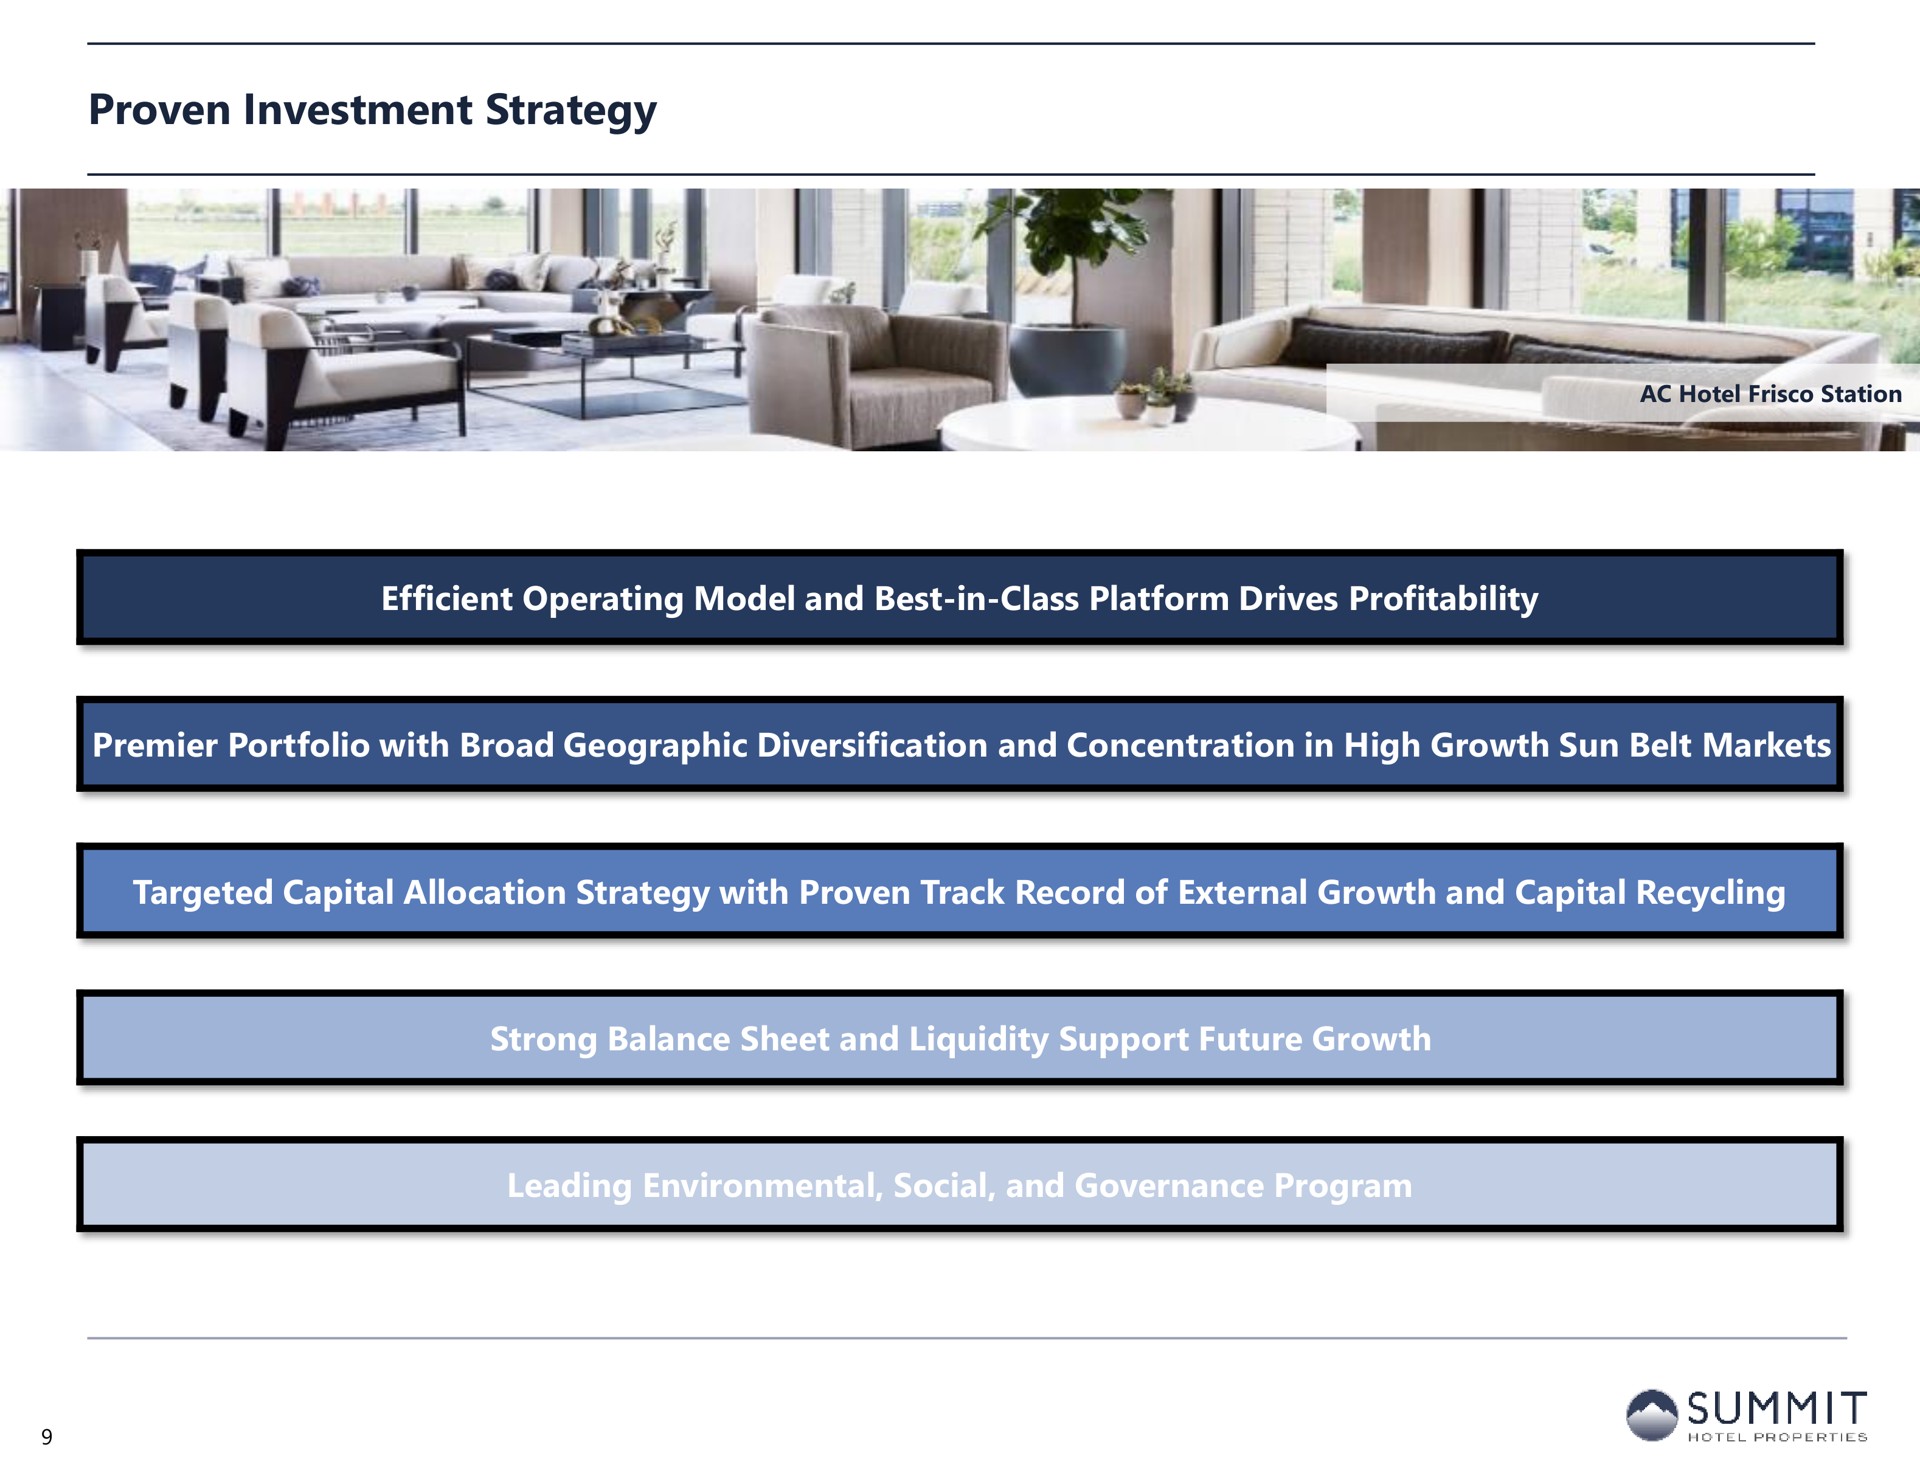 proven investment strategy i | Summit Hotel Properties